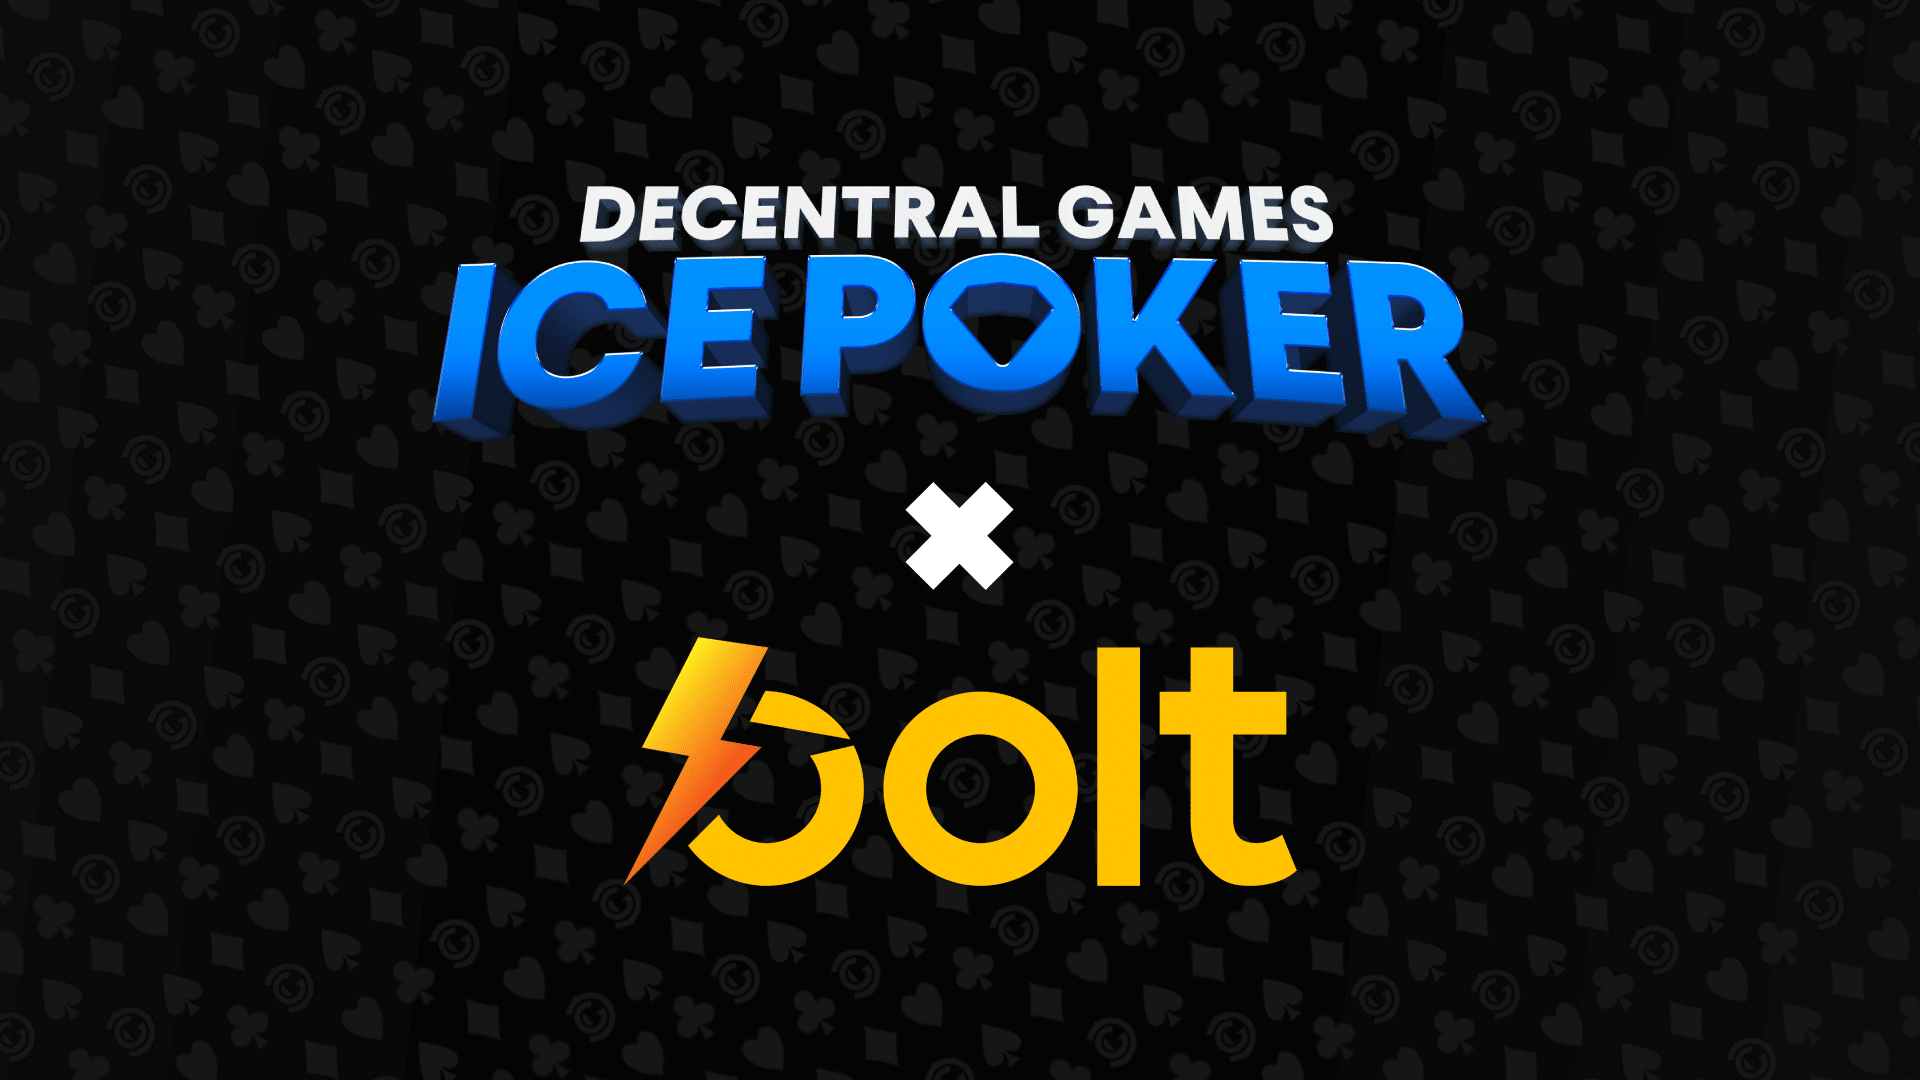 How to Earn ICE Poker Rewards Using LootBolt